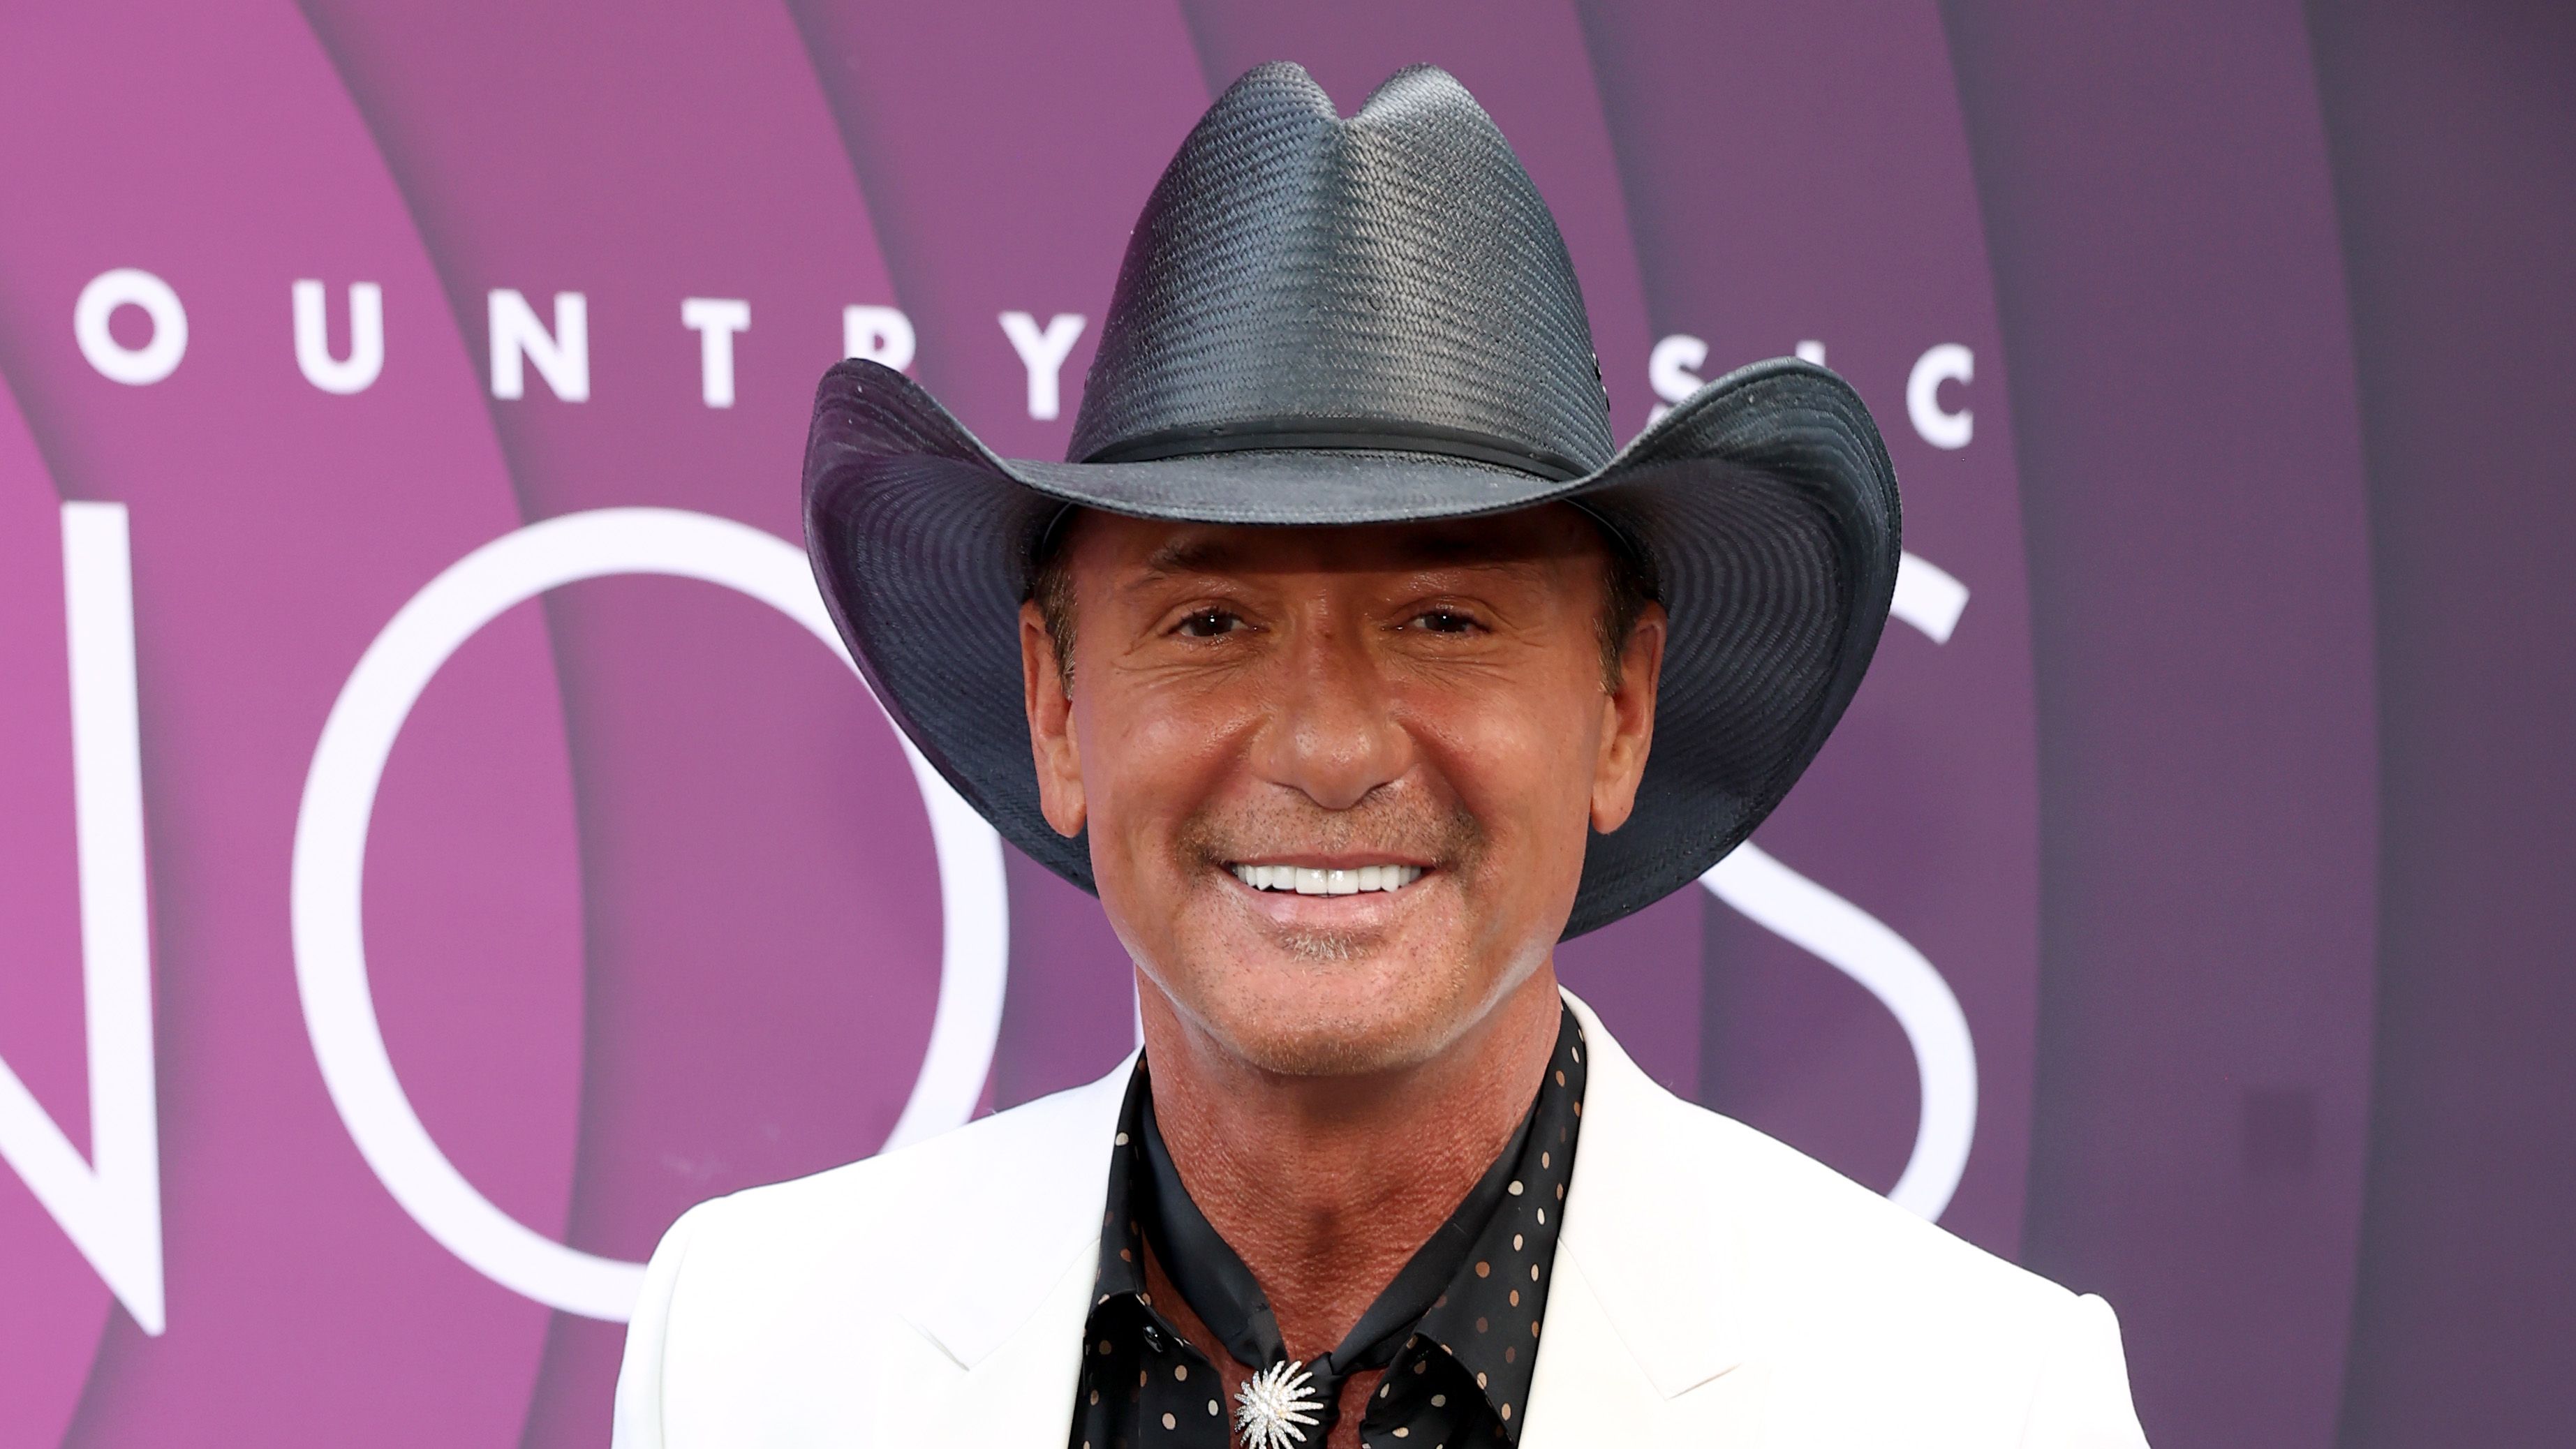 Faith Hill and Tim McGraw seen celebrating daughter's birthday at